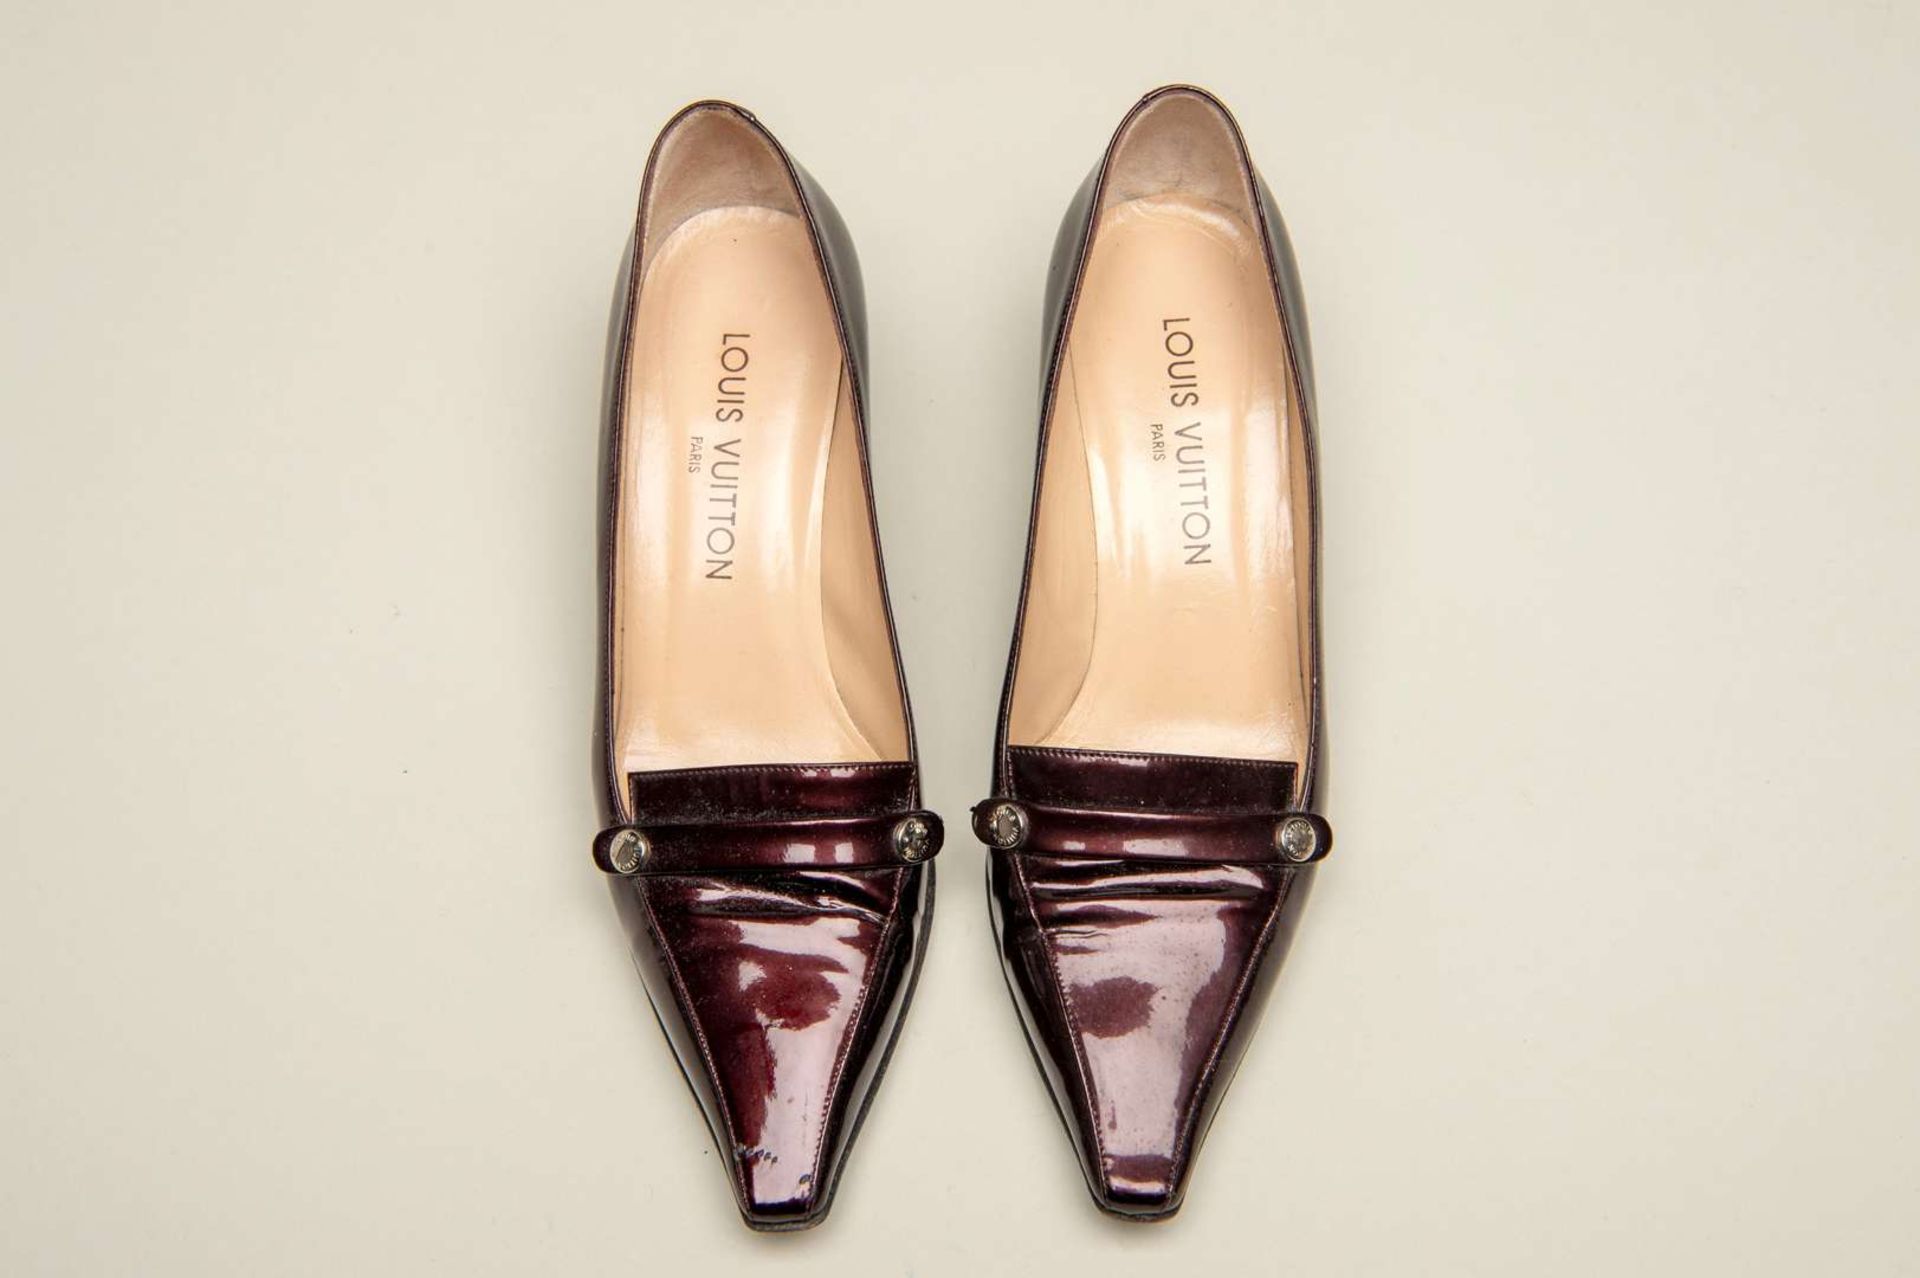 LOUIS VUITTON, a pair of dark bronze, patent leather pumps - Image 5 of 6